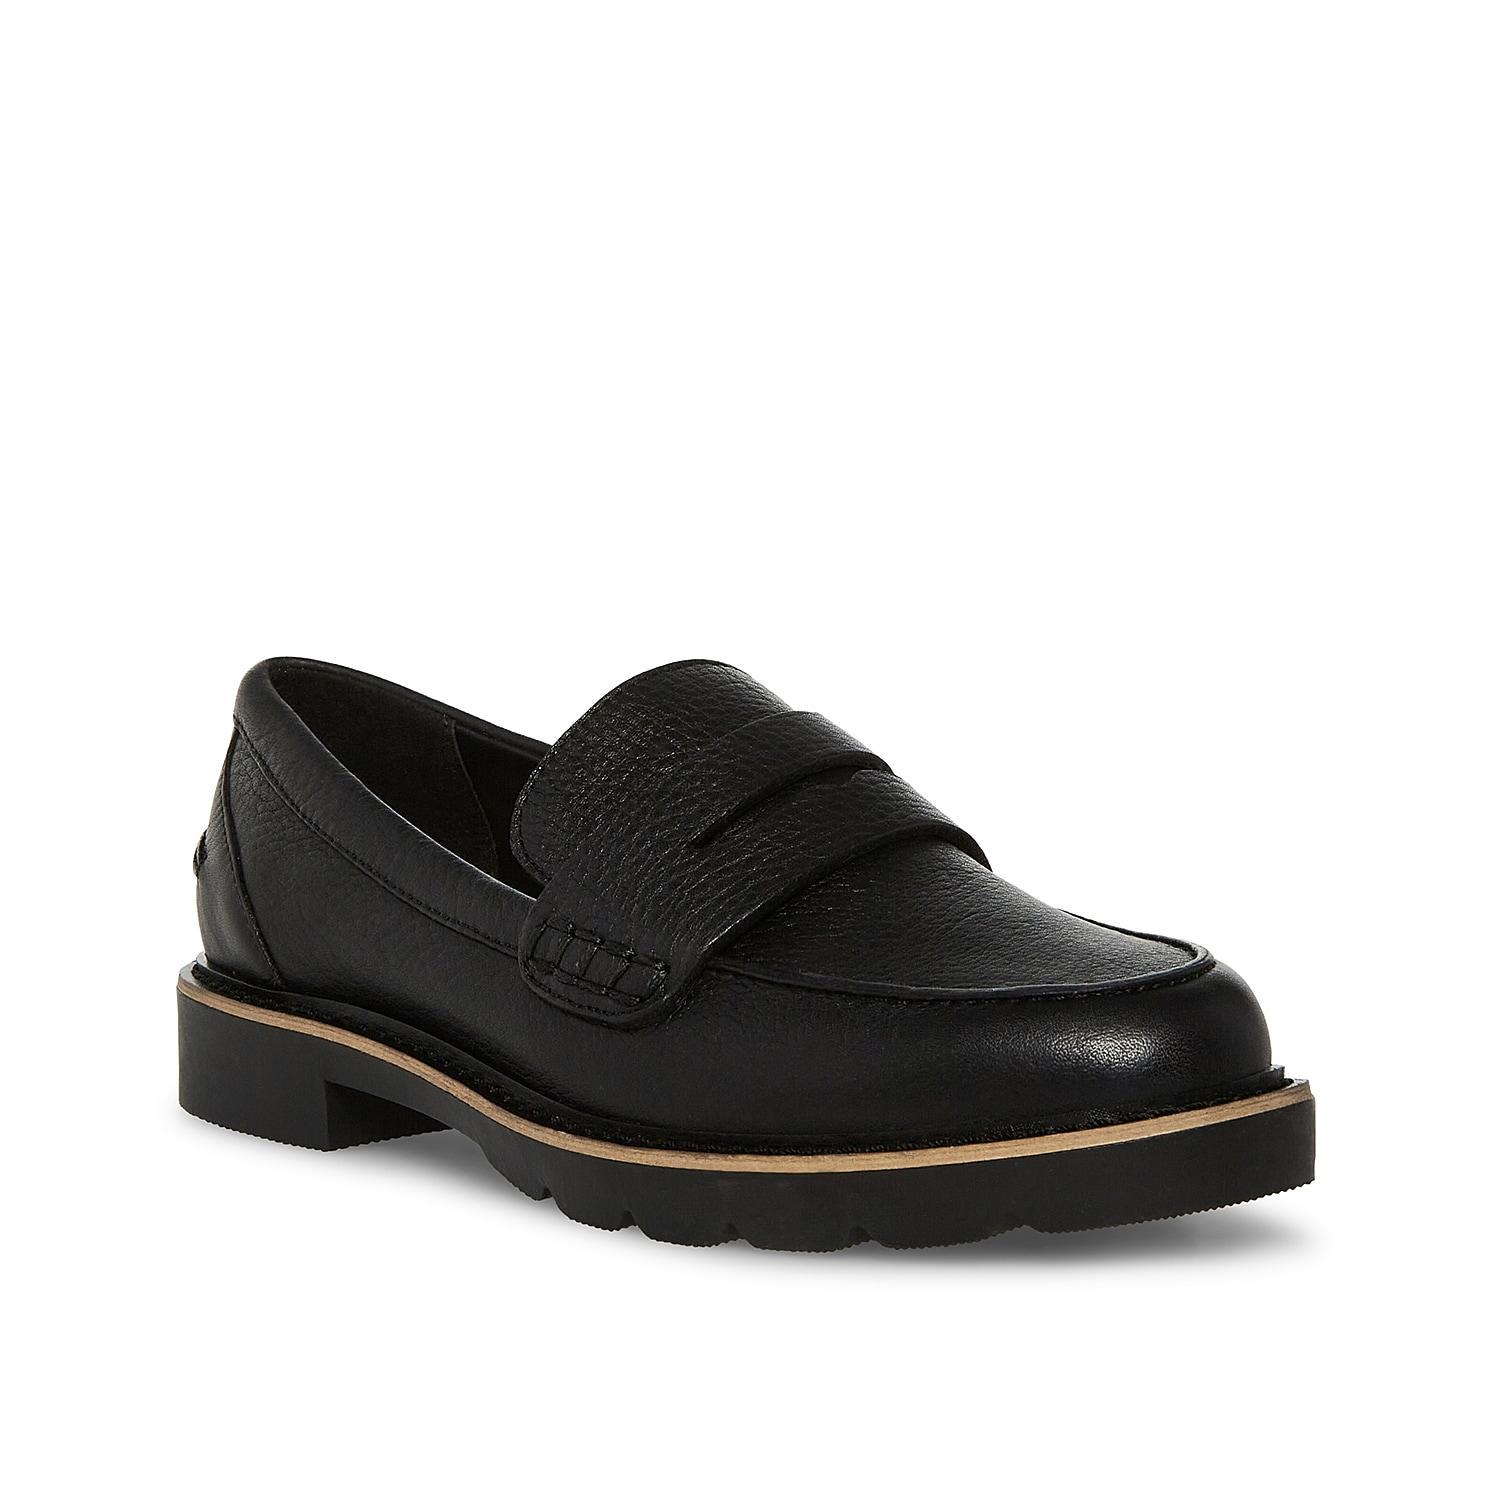 Blondo Waterproof Penny Loafer Product Image